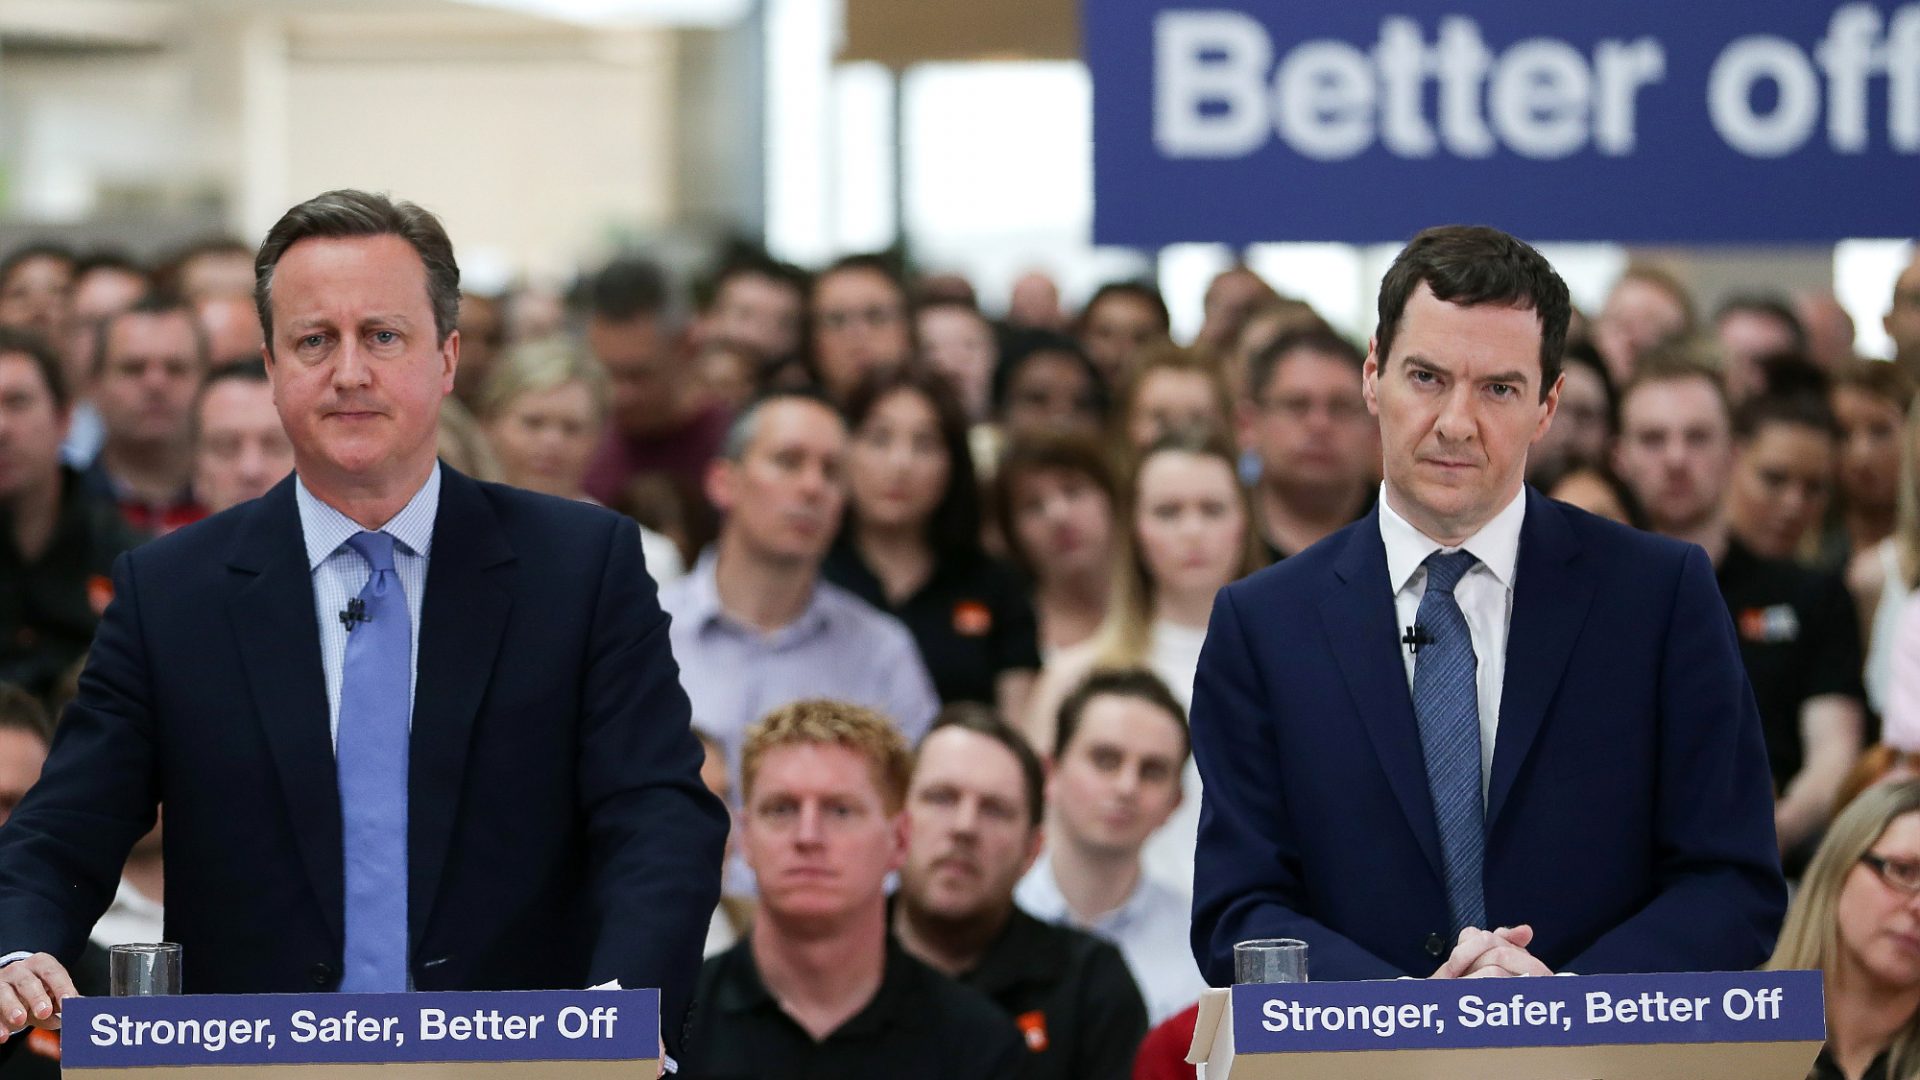 Cameron and Osborne: ‘in favour of change and social liberalism’ or the architects of 14 years of misery? Photo: Daniel Leal/Olivas/WPA Pool/Getty